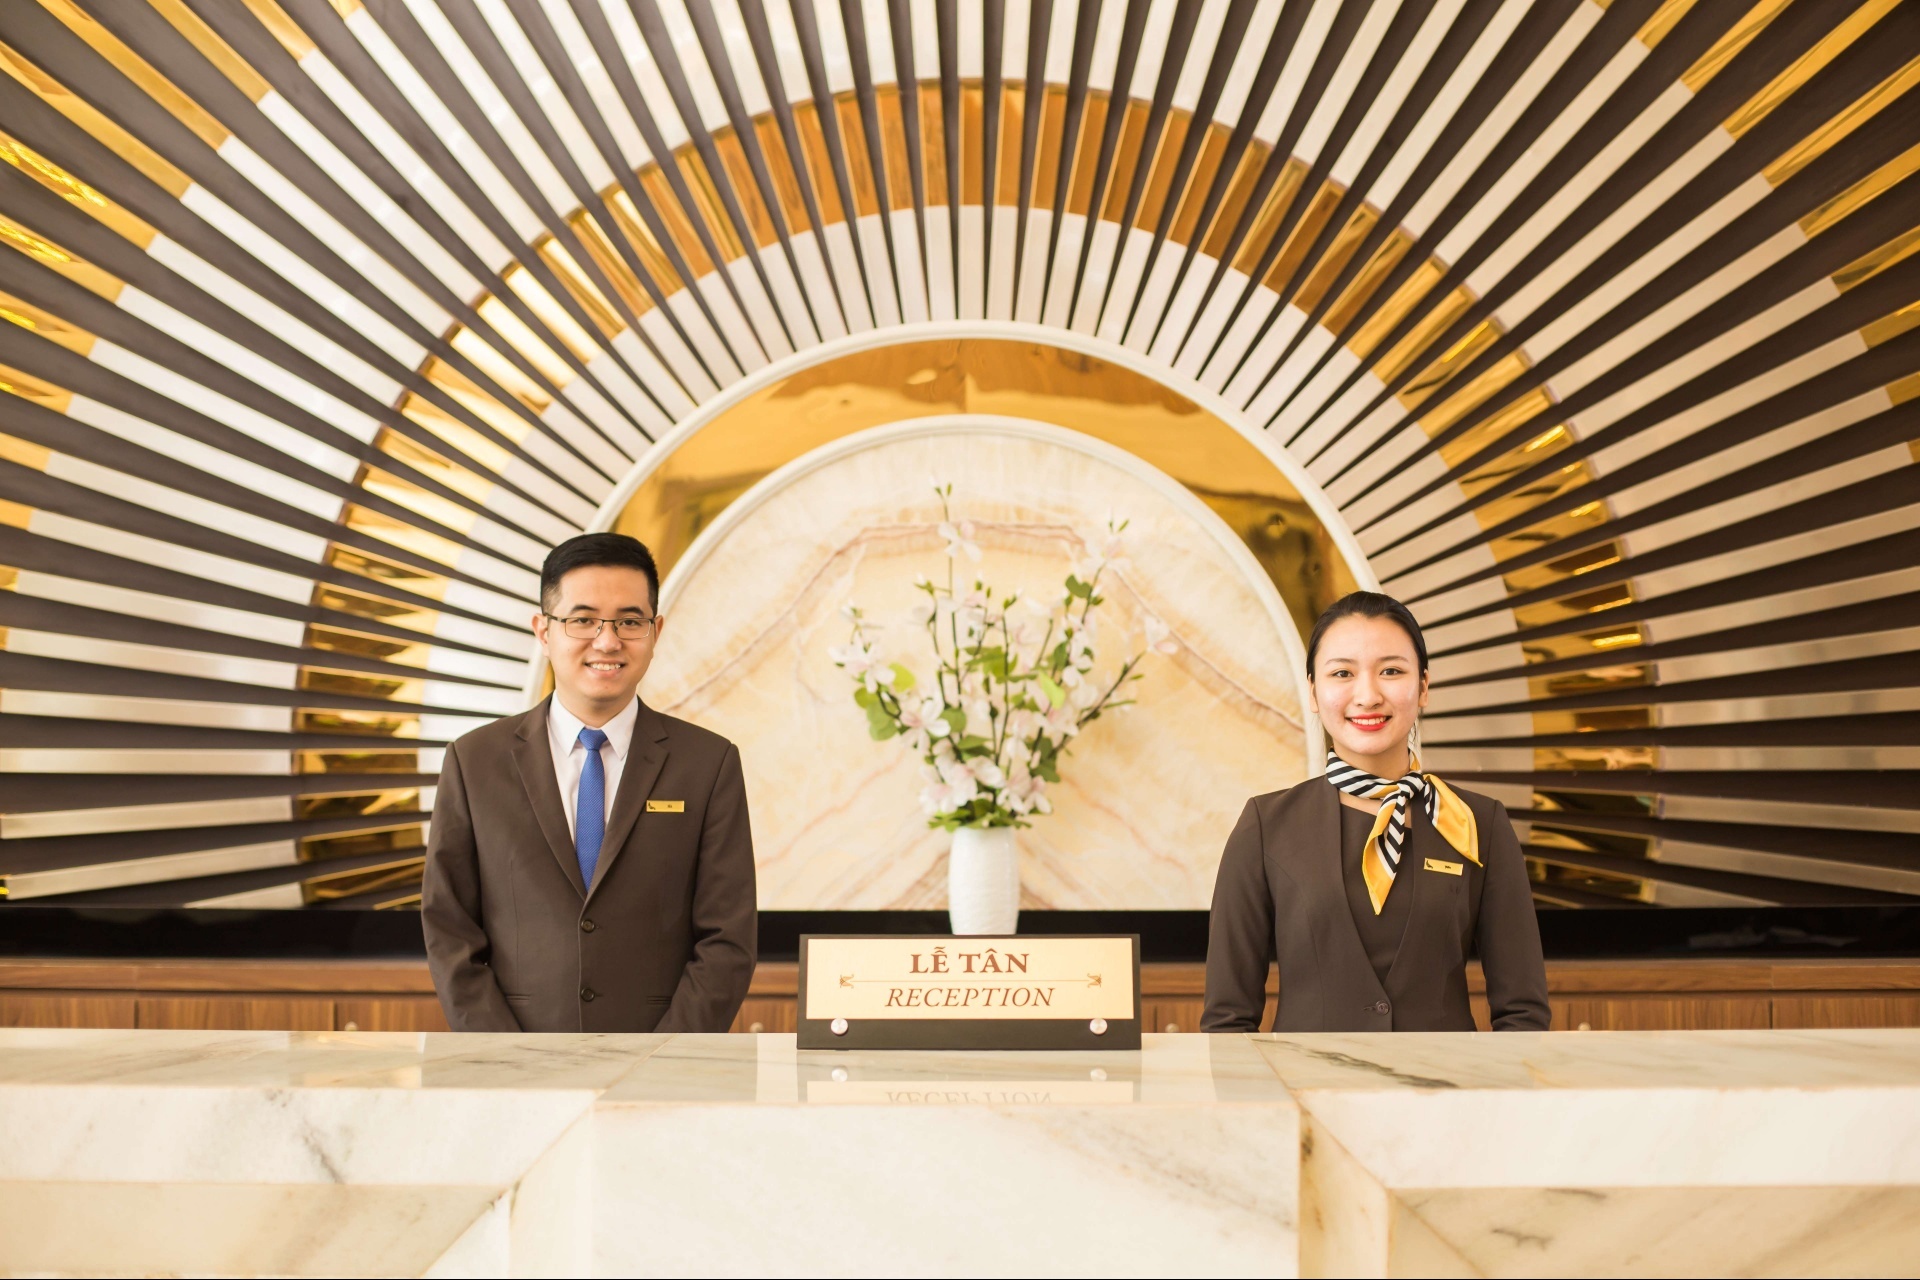 Muong Thanh hotels selected as accommodation for SEA Games athletes